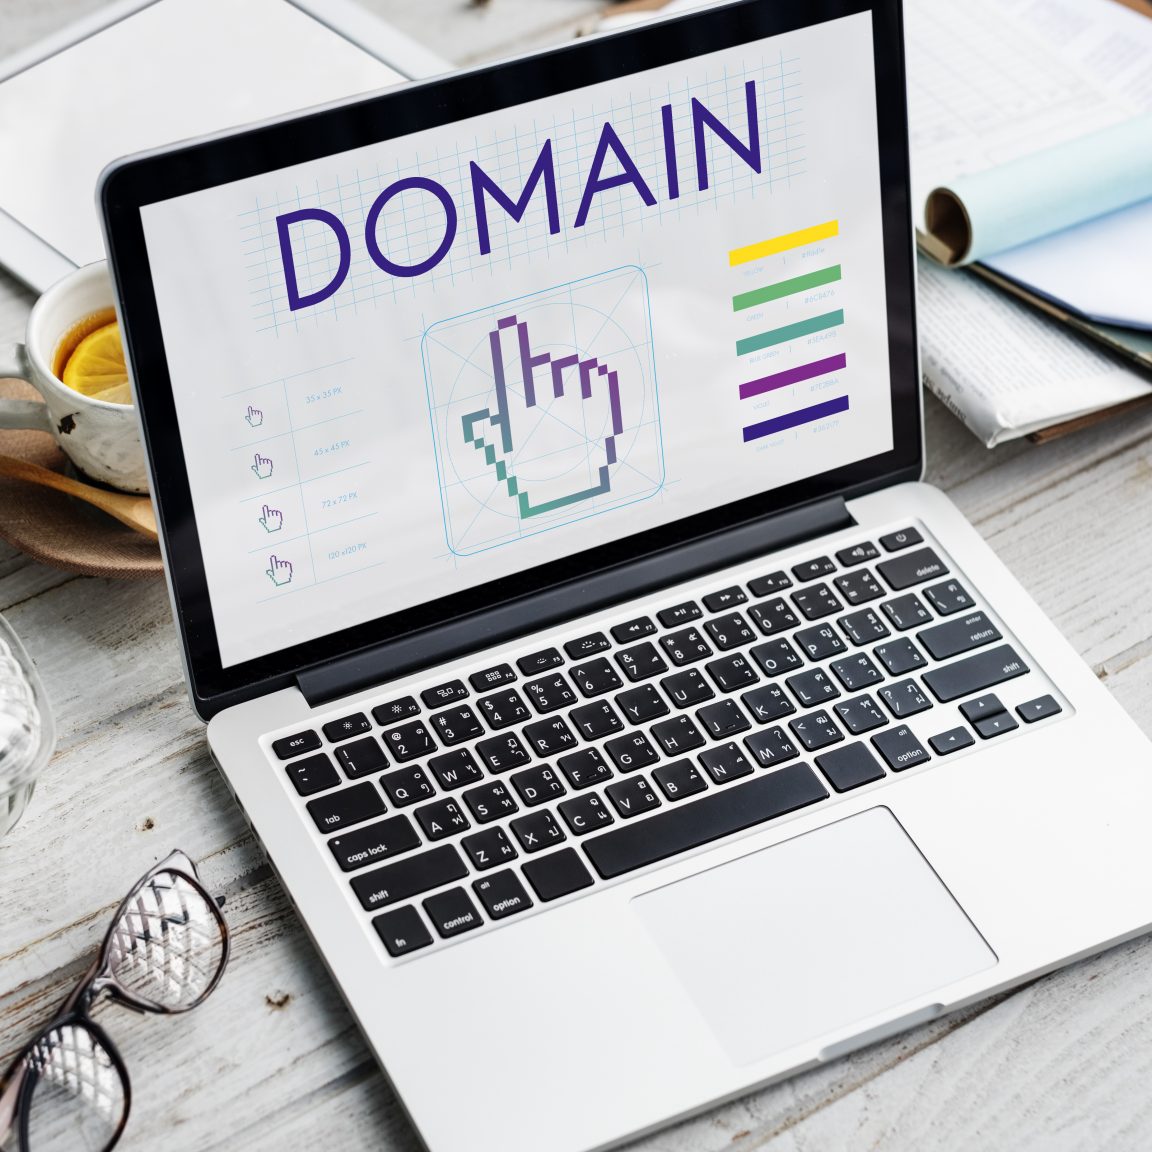 Flipping Domains - How to Become a Successful Domainer?